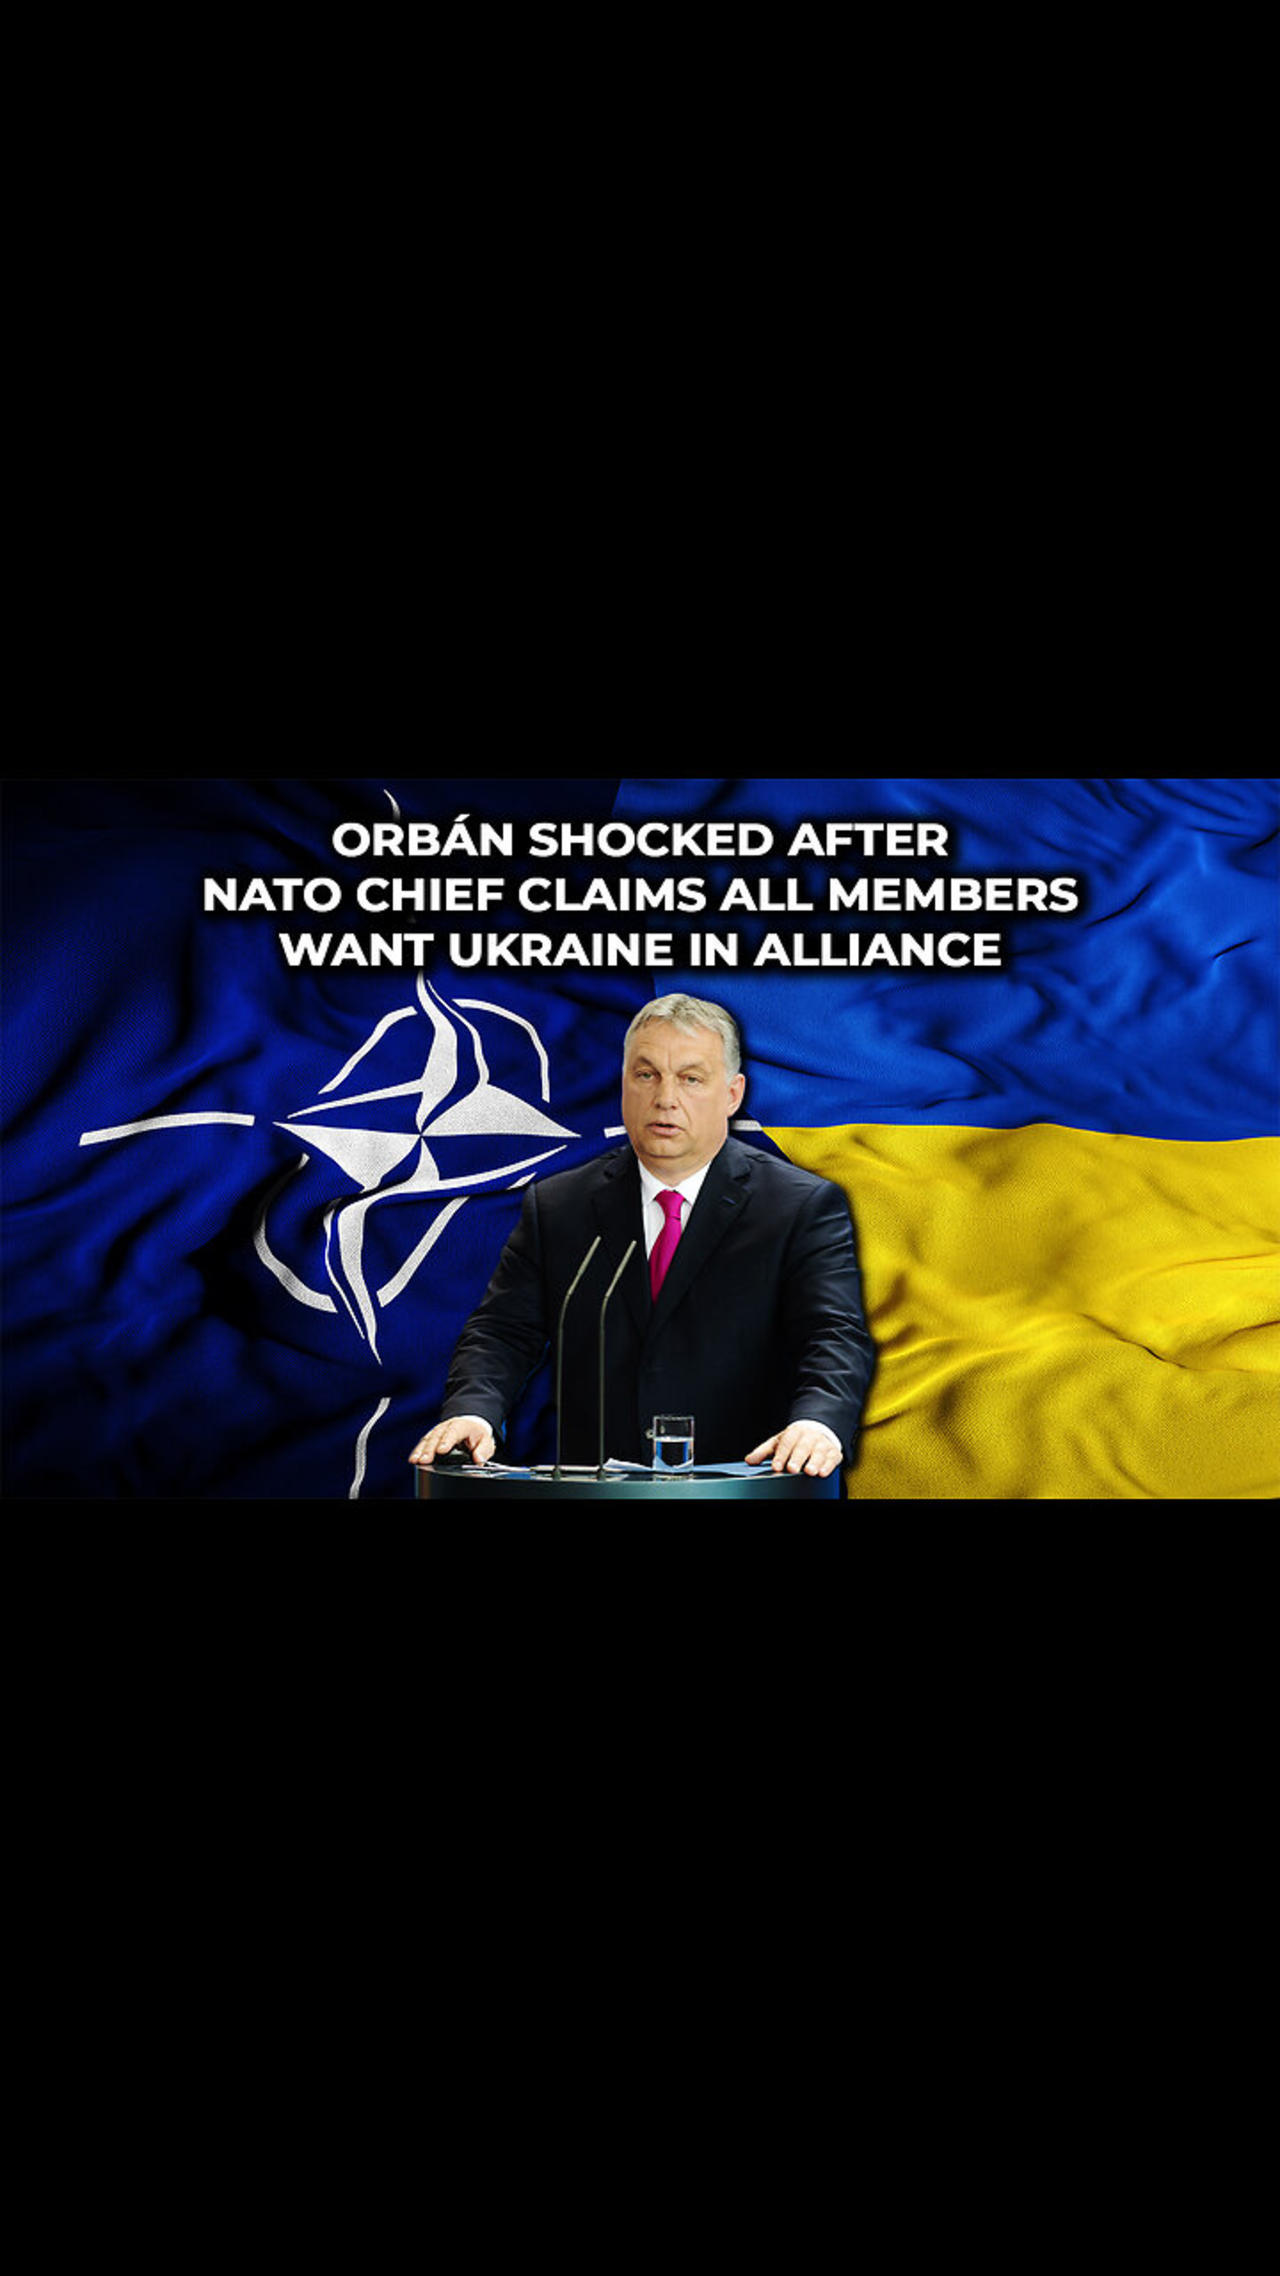 Orbán Shocked After NATO Chief Claims All Members Want Ukraine in Alliance